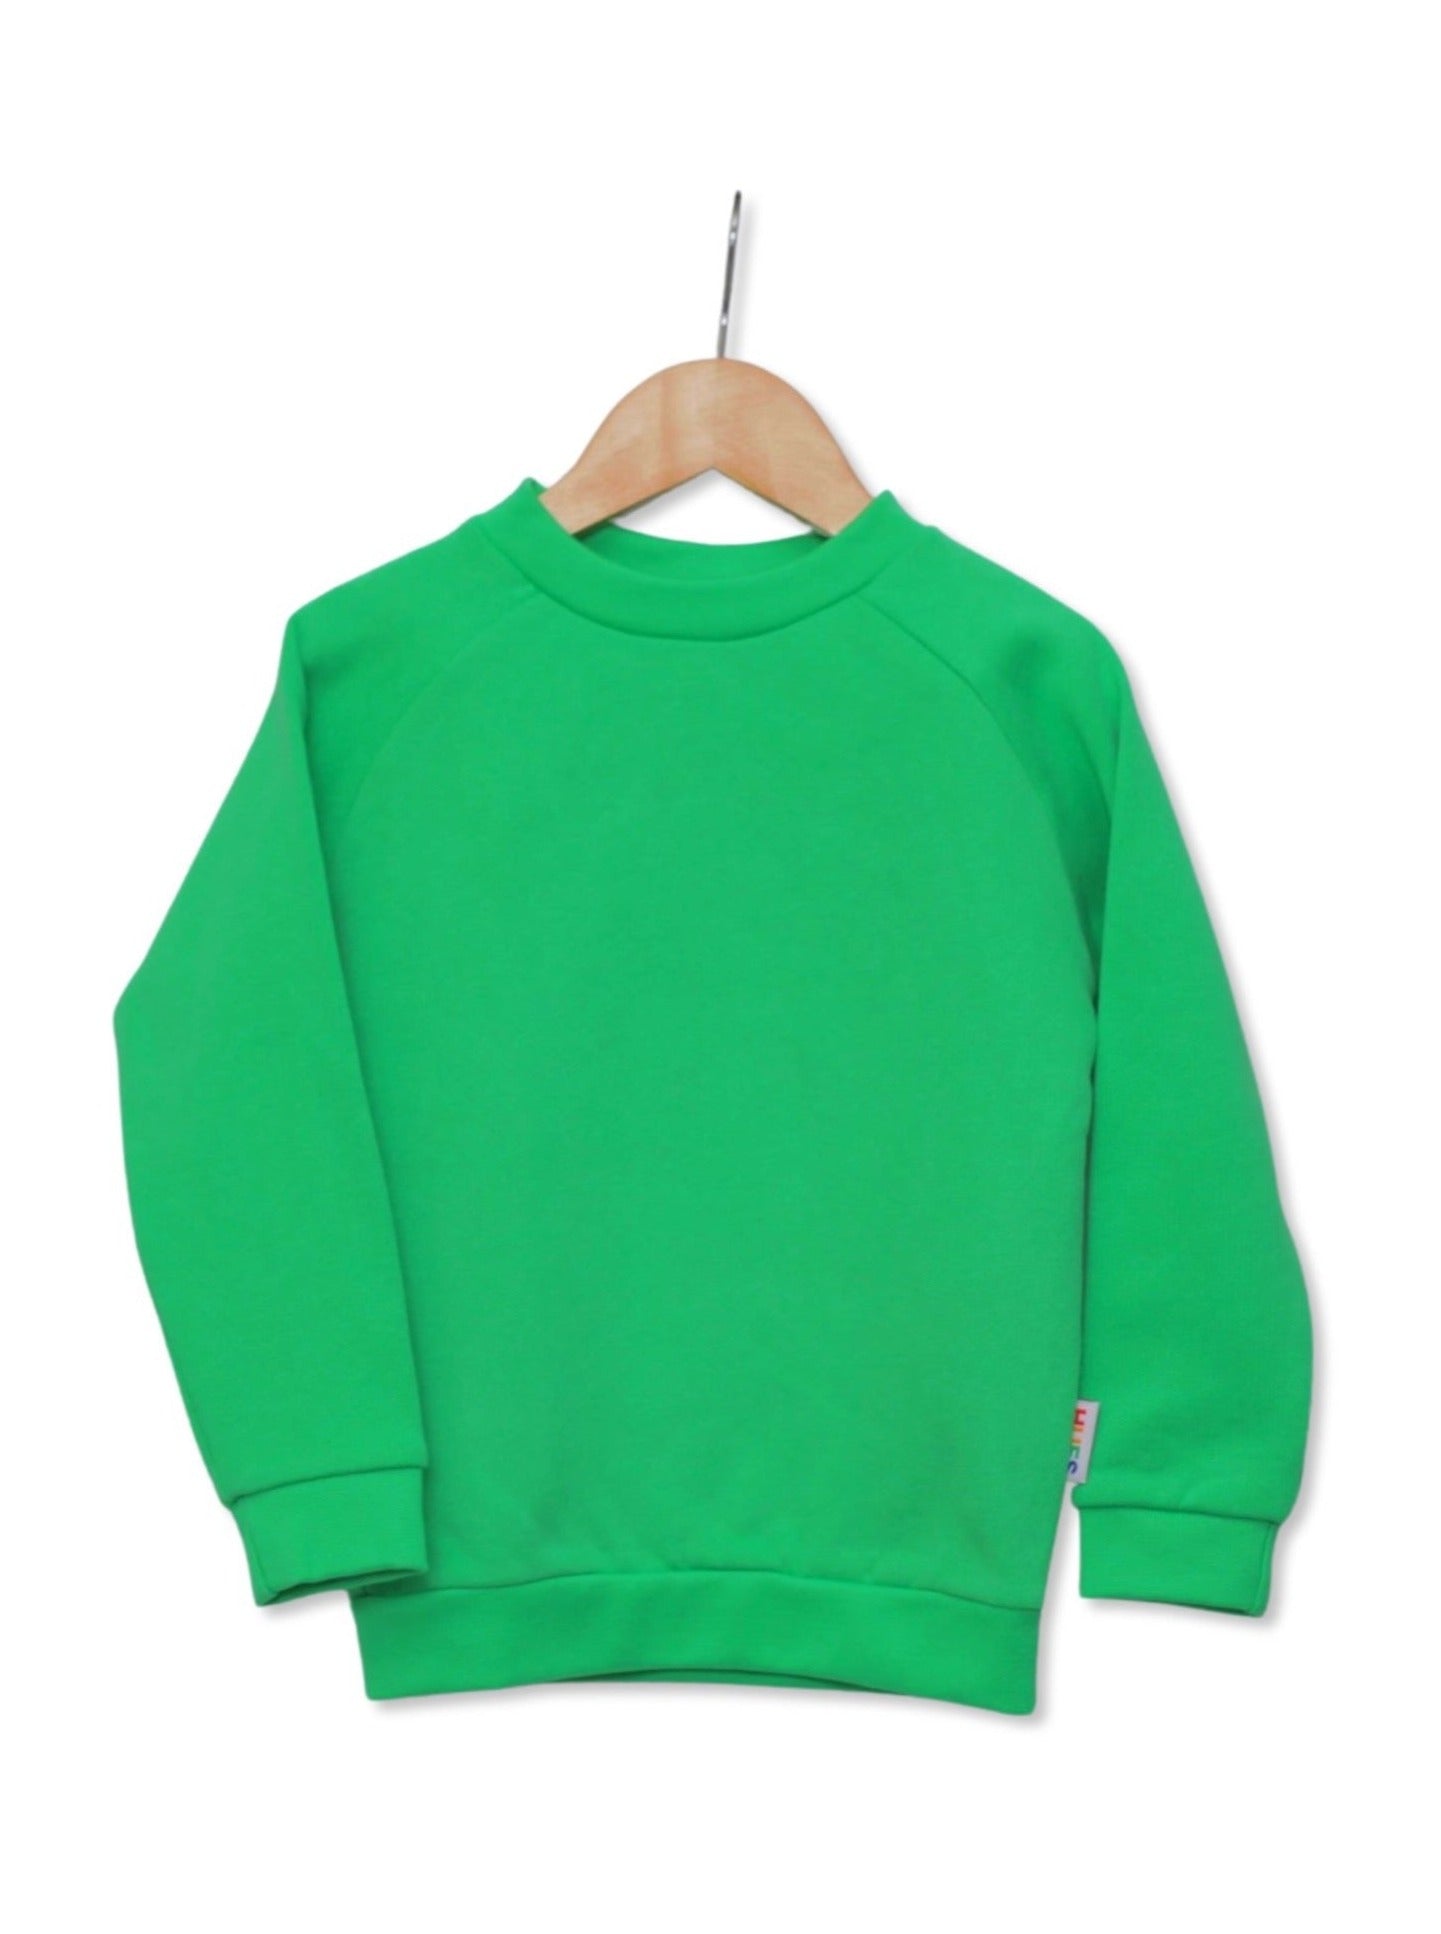 Kids Green Unisex Jumper Front View- Hues Clothing